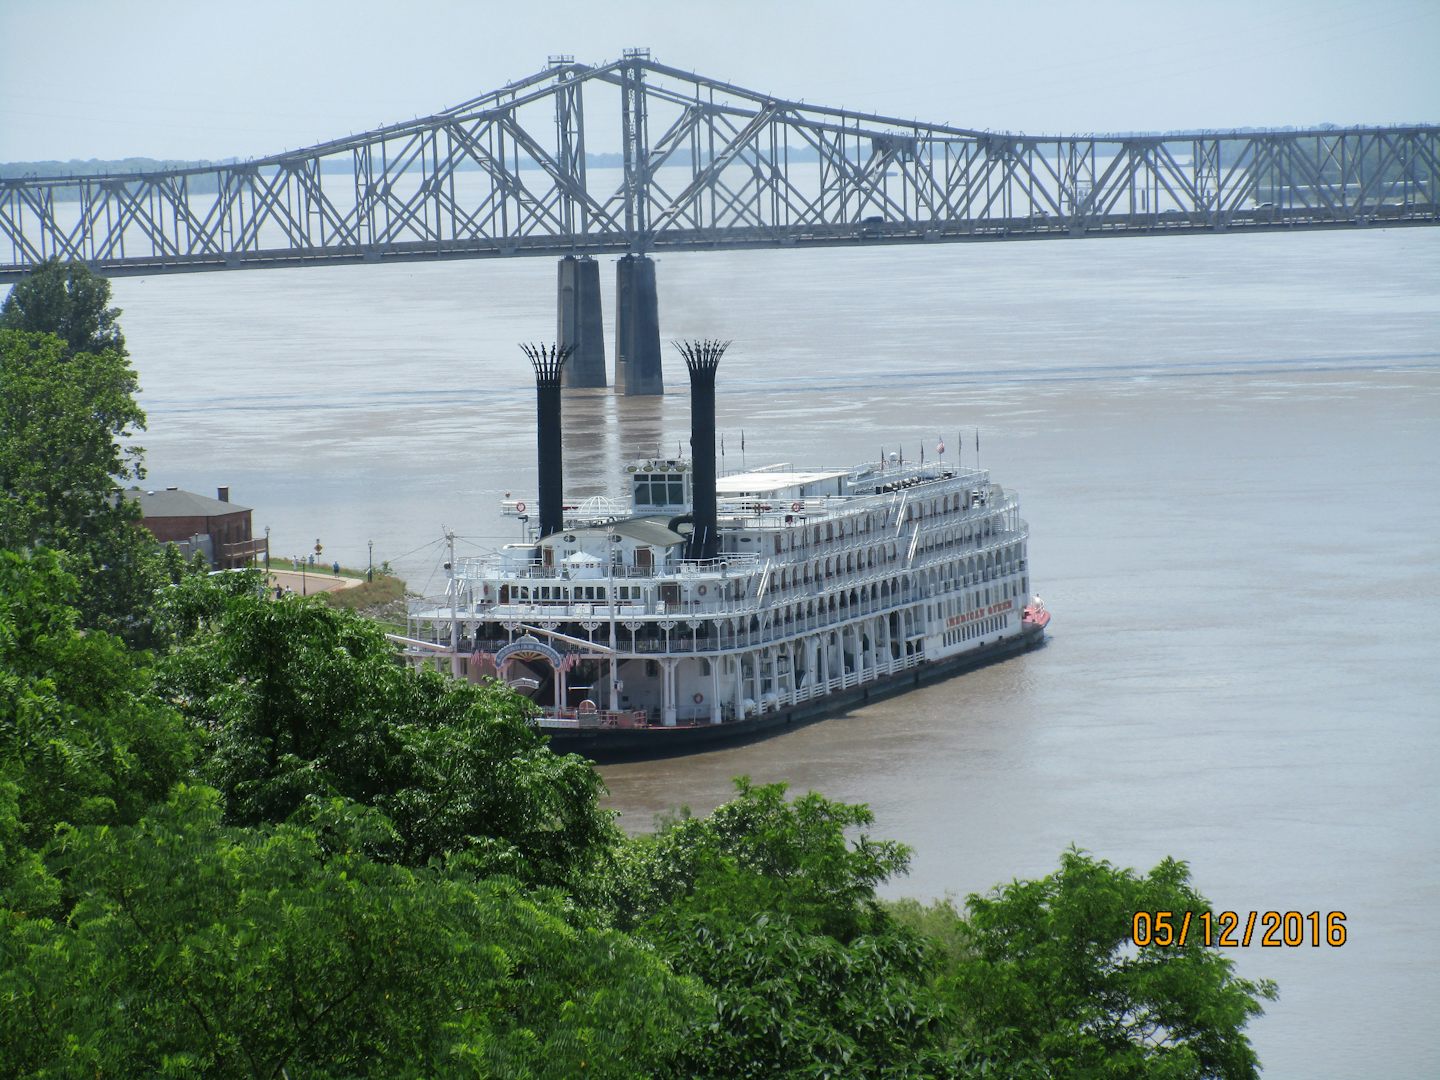 Beautiful American Queen docked at a port of calLevee at Natchez, MS.l.